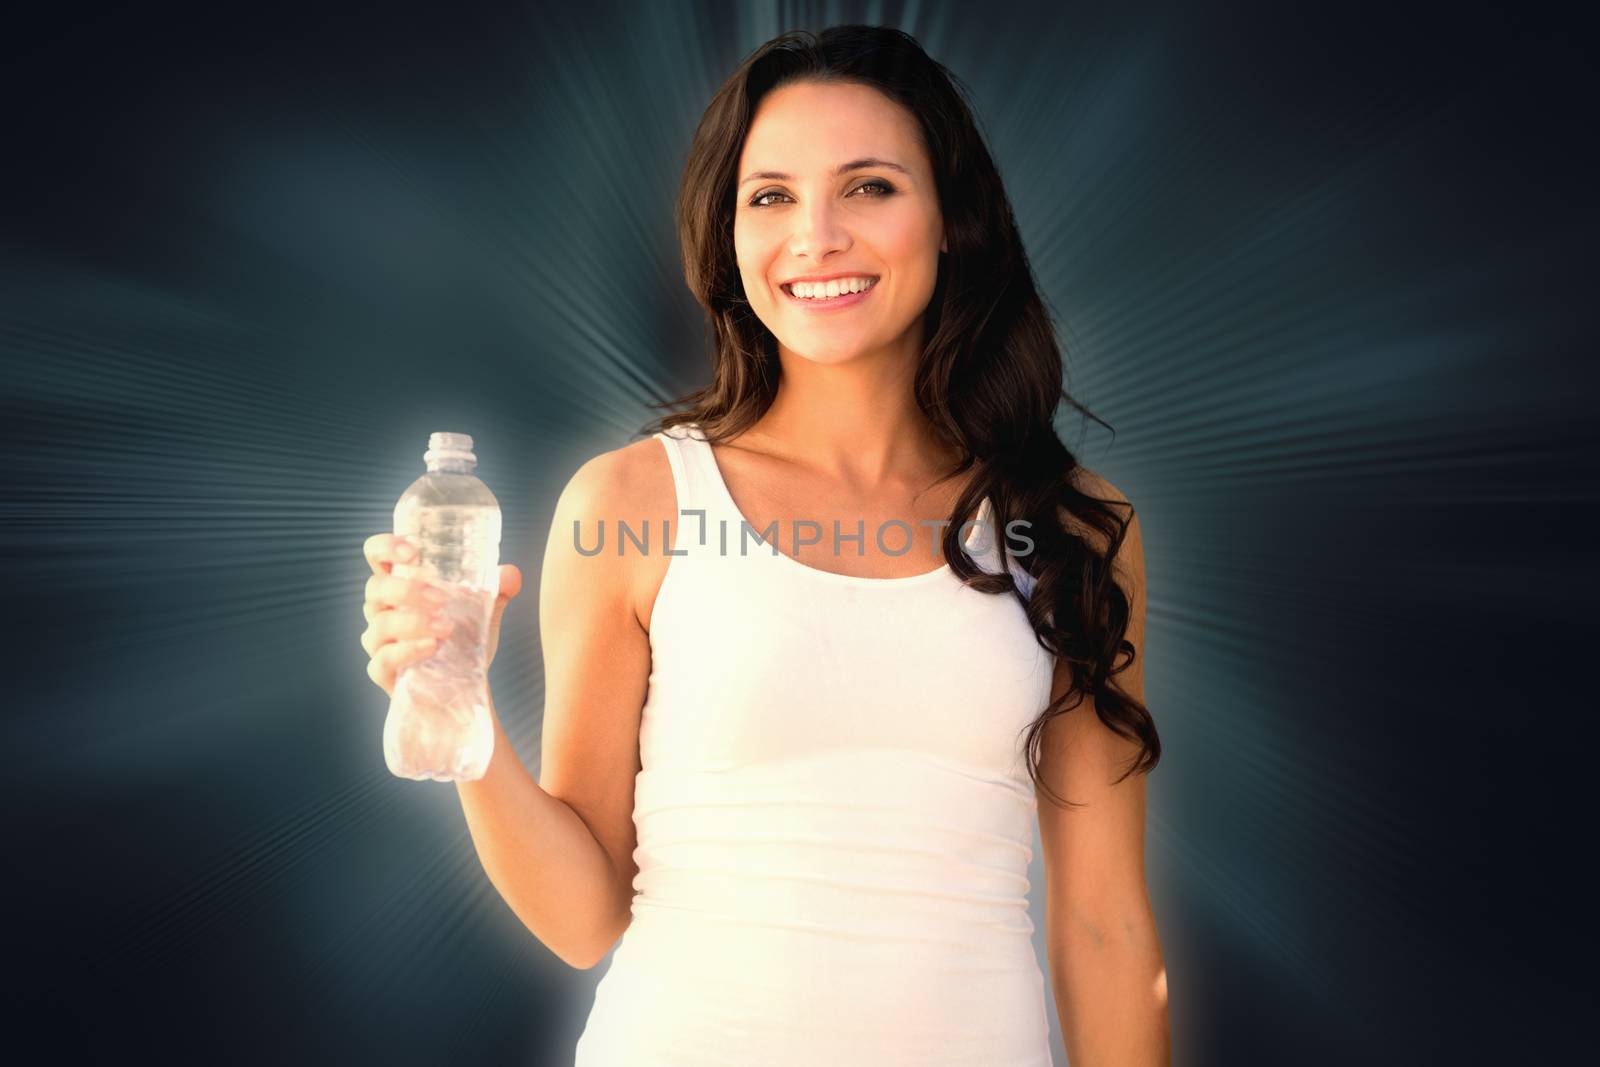 Brunette with water bottle against abstract background